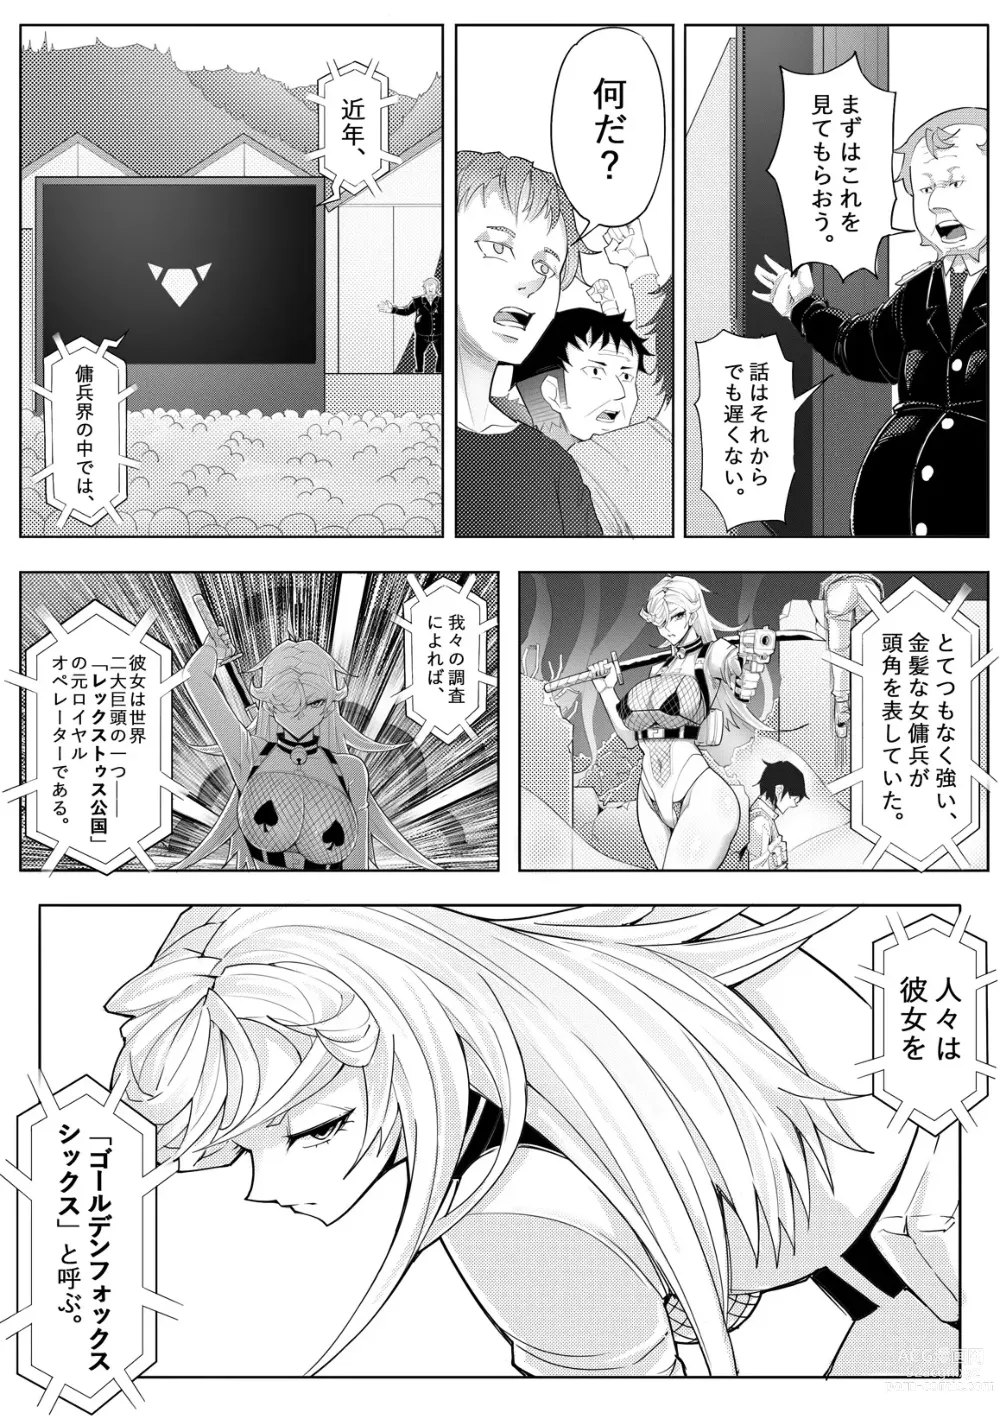 Page 19 of doujinshi Skin Normal Mission 04